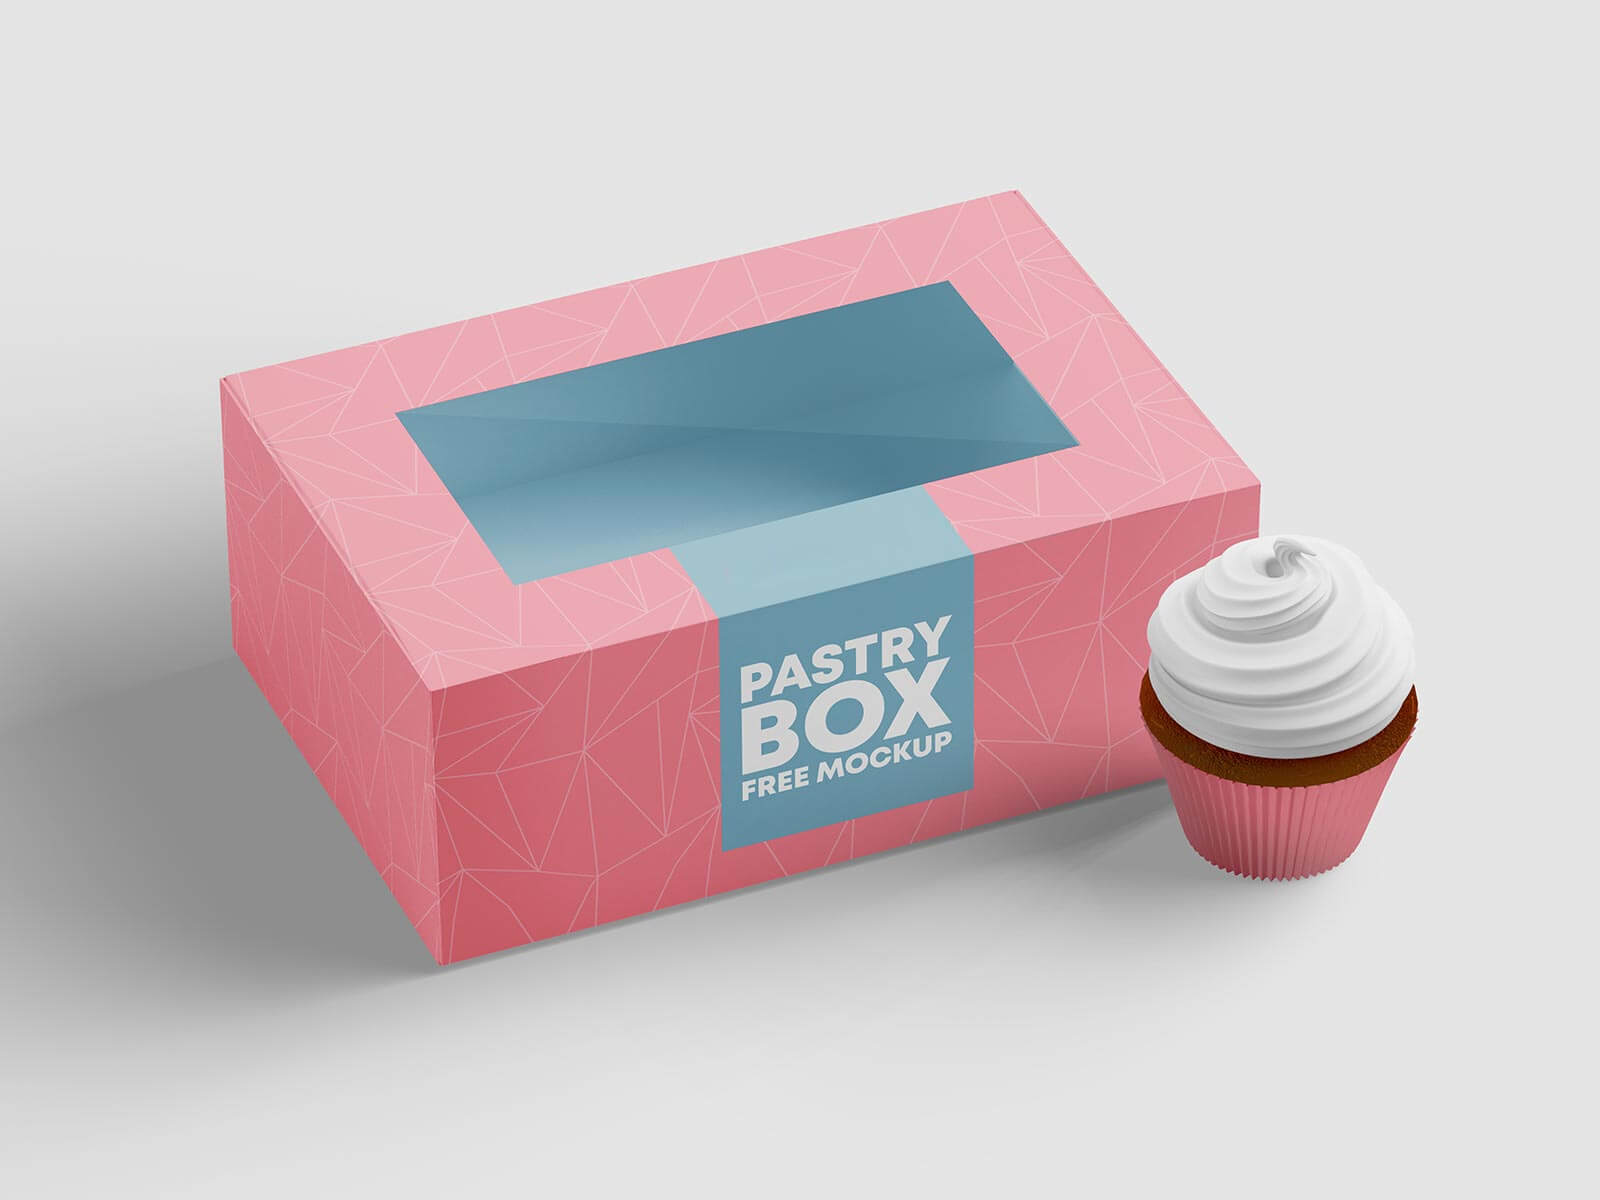 Free-Cup-Cakes-Pastry-Mockup-PSD-Set